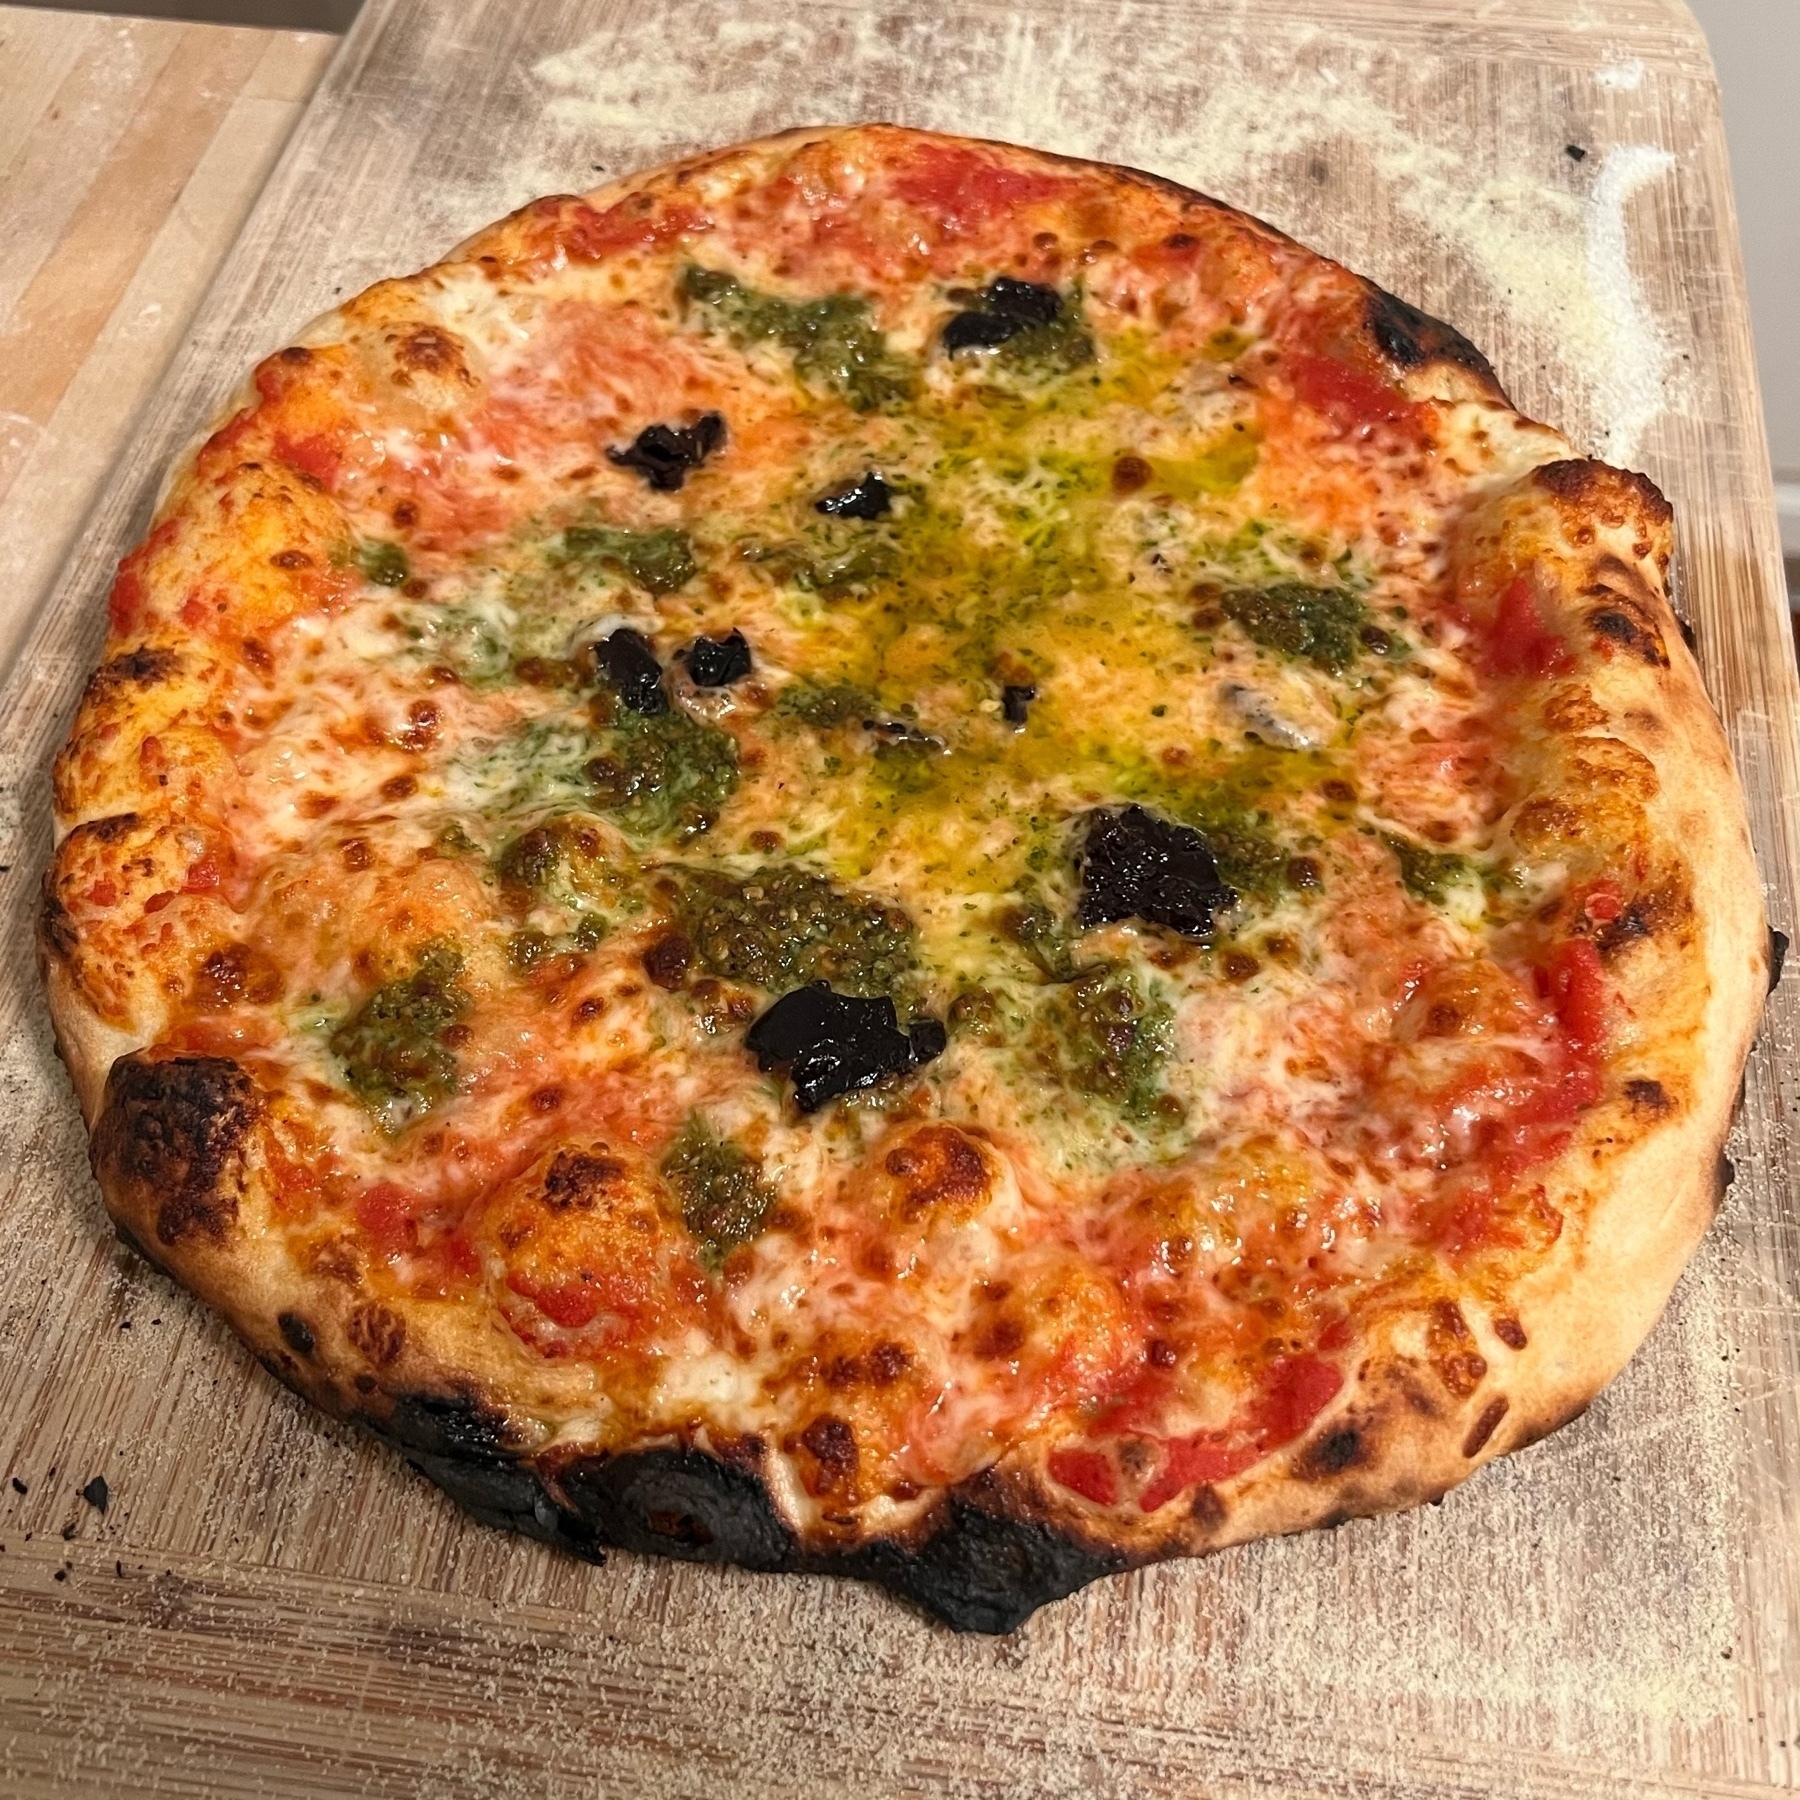 picture of a homemade pizza with green splotches of pesto and dots of black olives